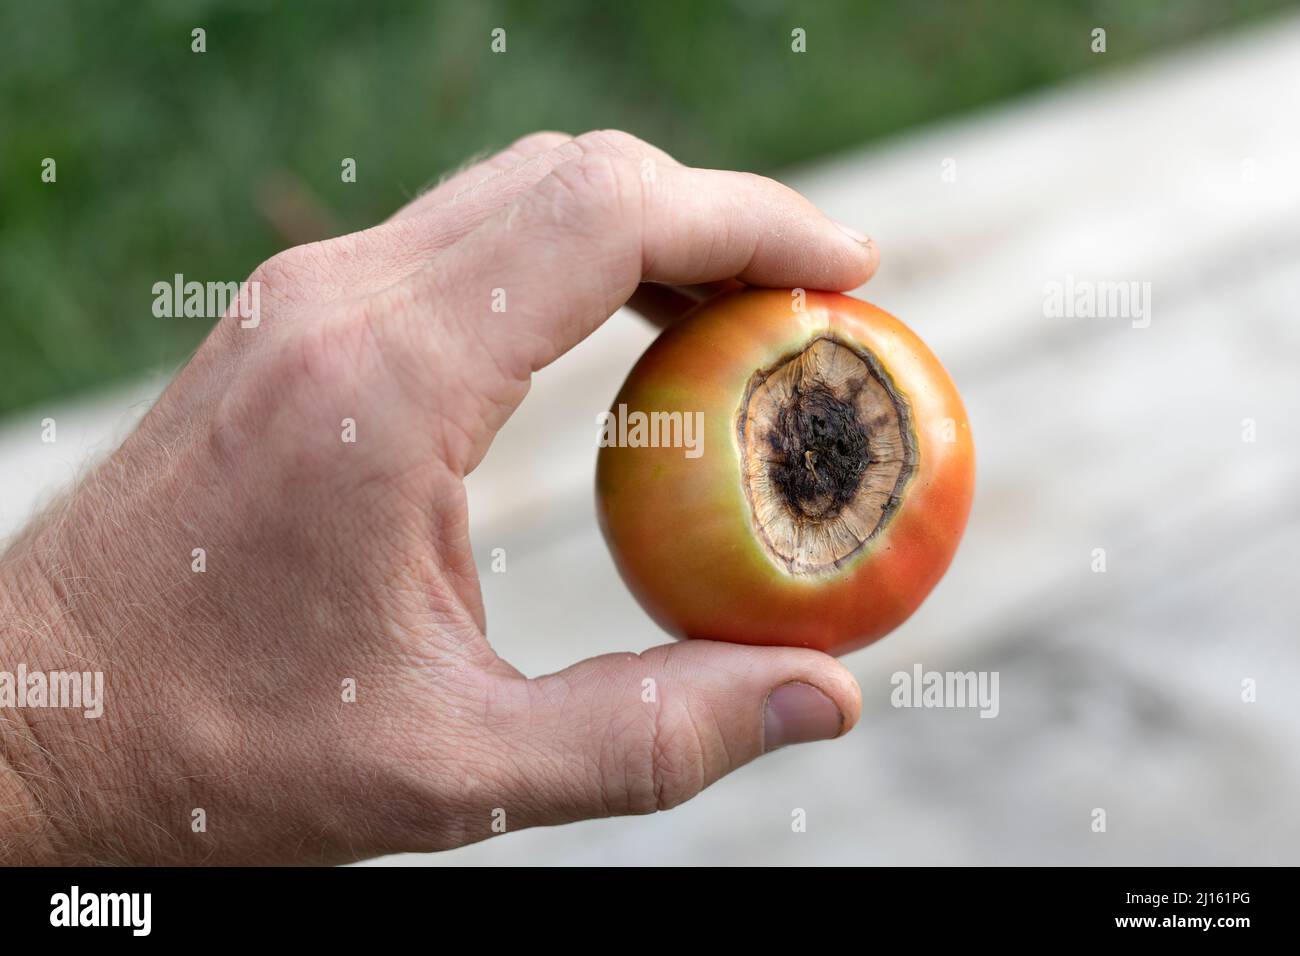 Sick tomato fruit affected by disease vertex rot in farmer hand Stock Photo